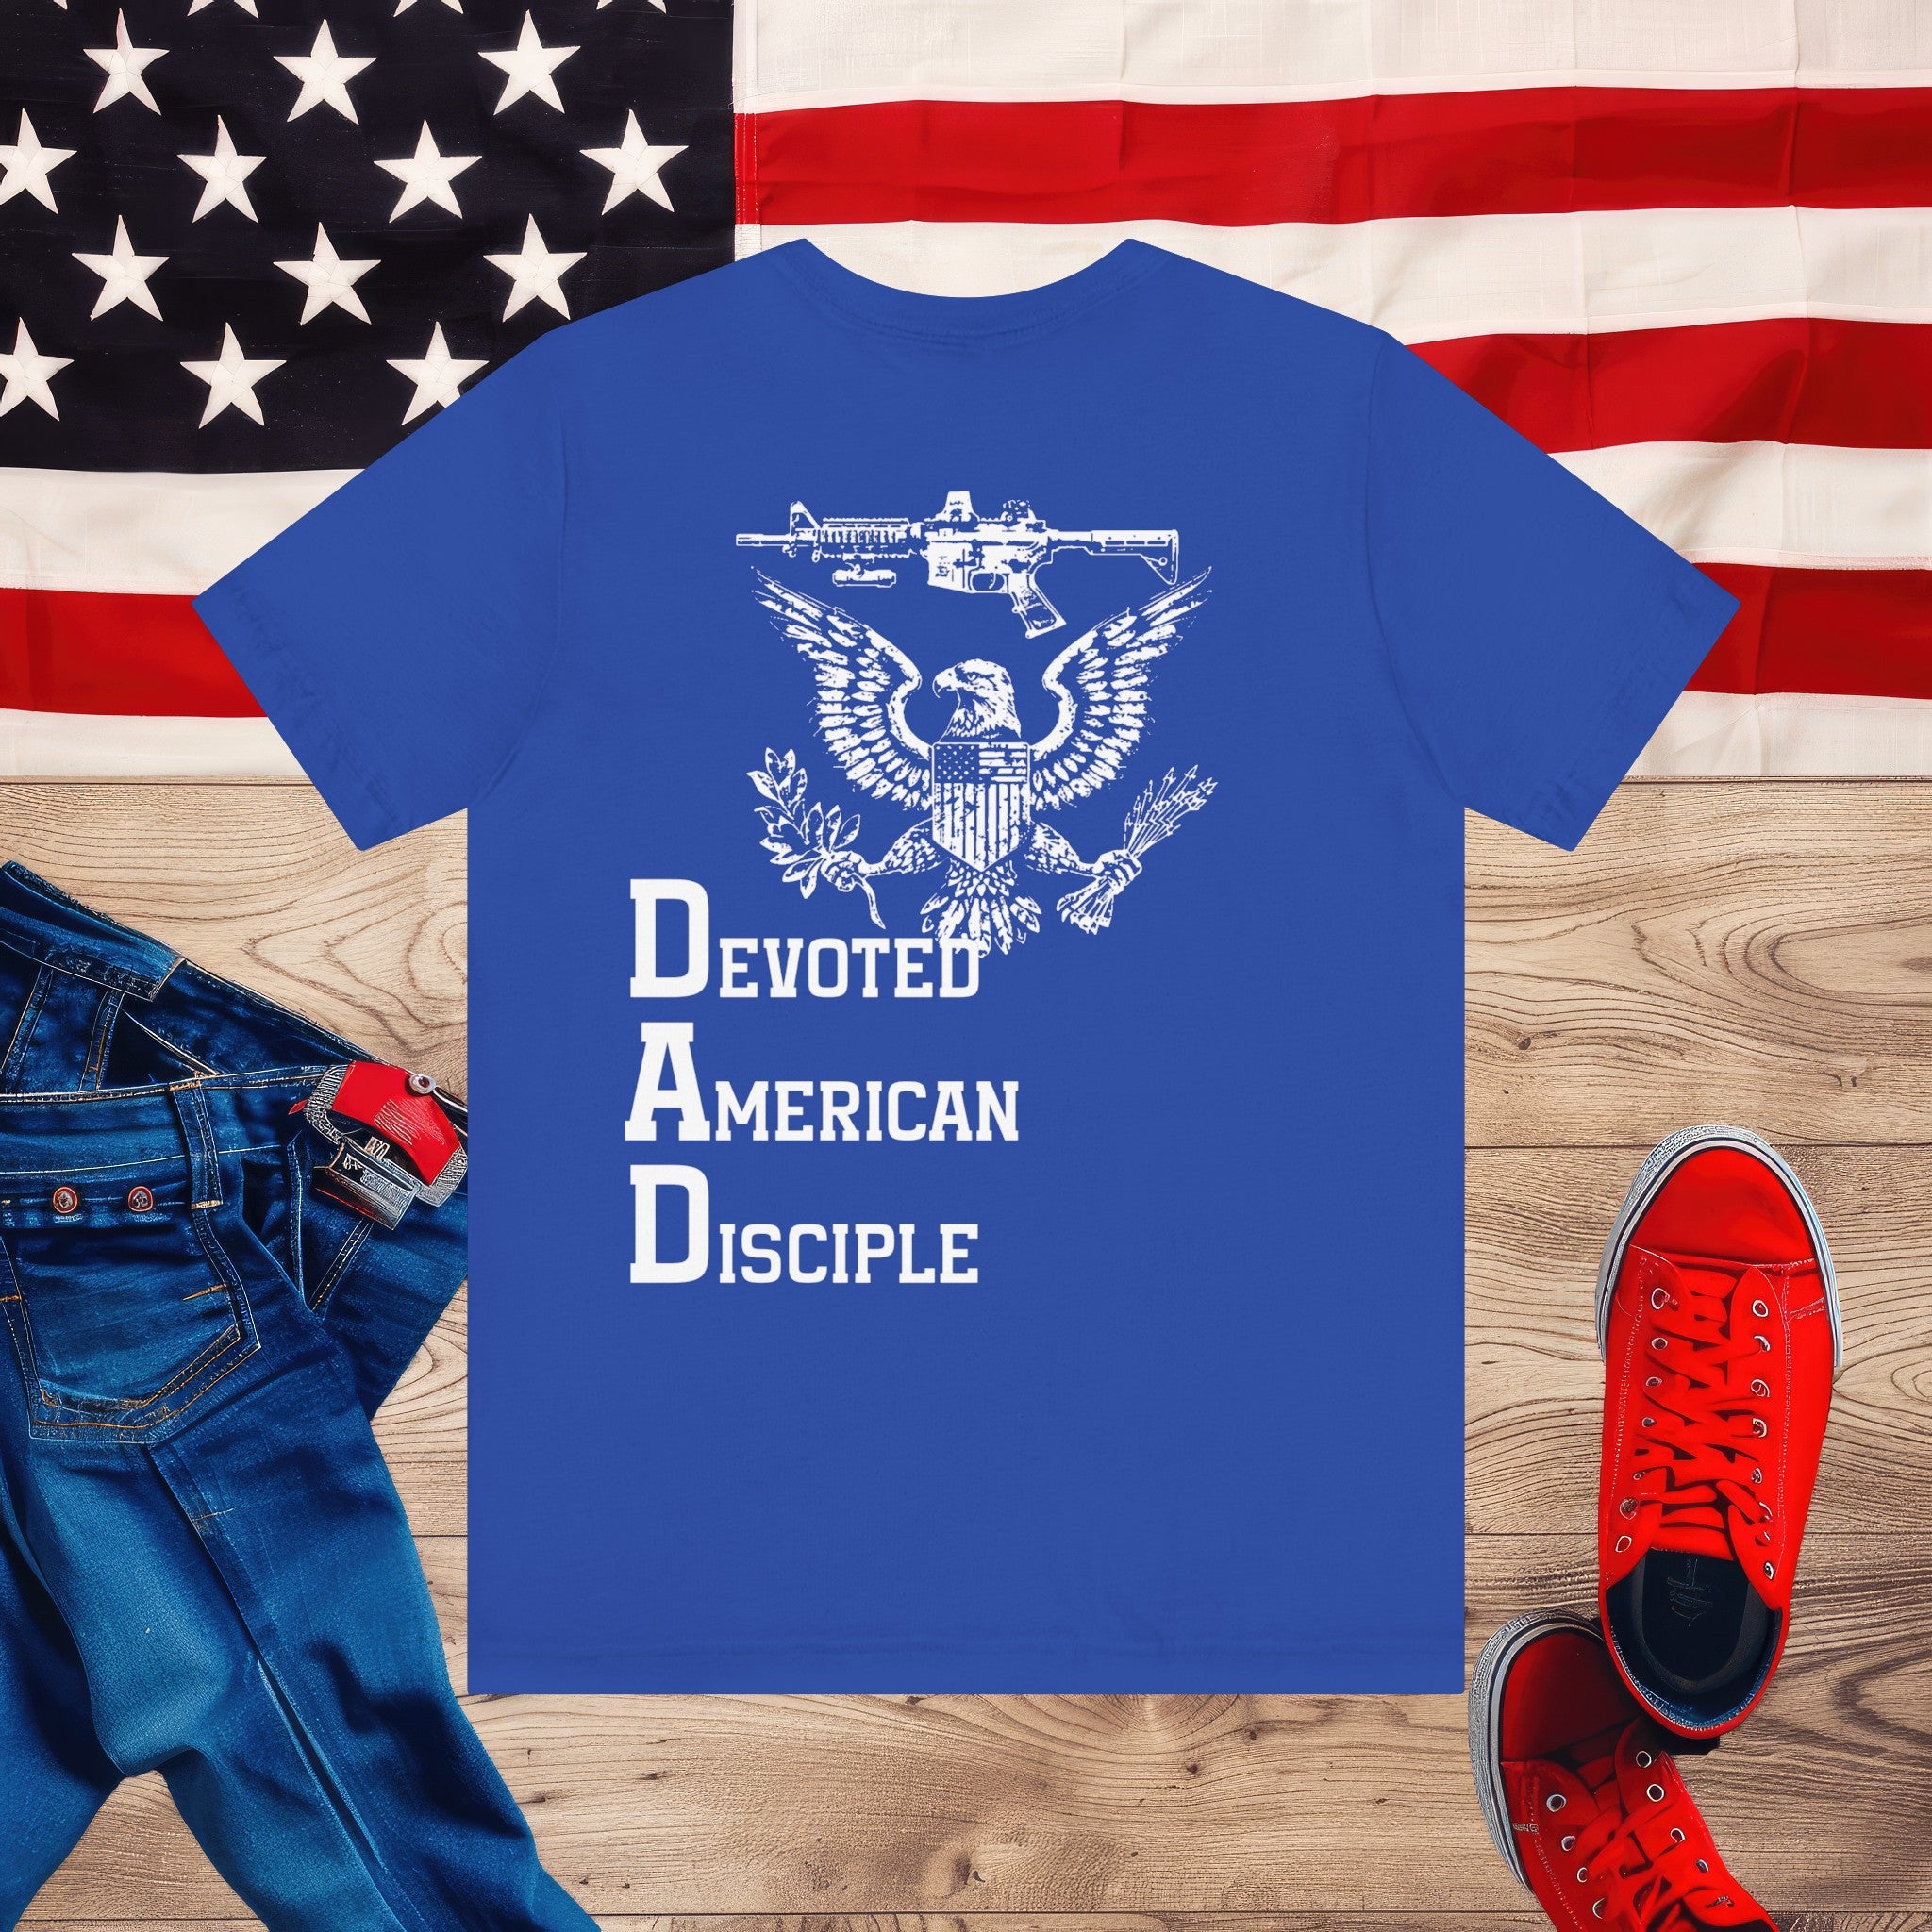 Devoted American Disciple T-Shirt (Back Design), Patriotic Eagle & Rifle Graphic Tee, Bold USA Supporter Shirt, American Pride Military Apparel